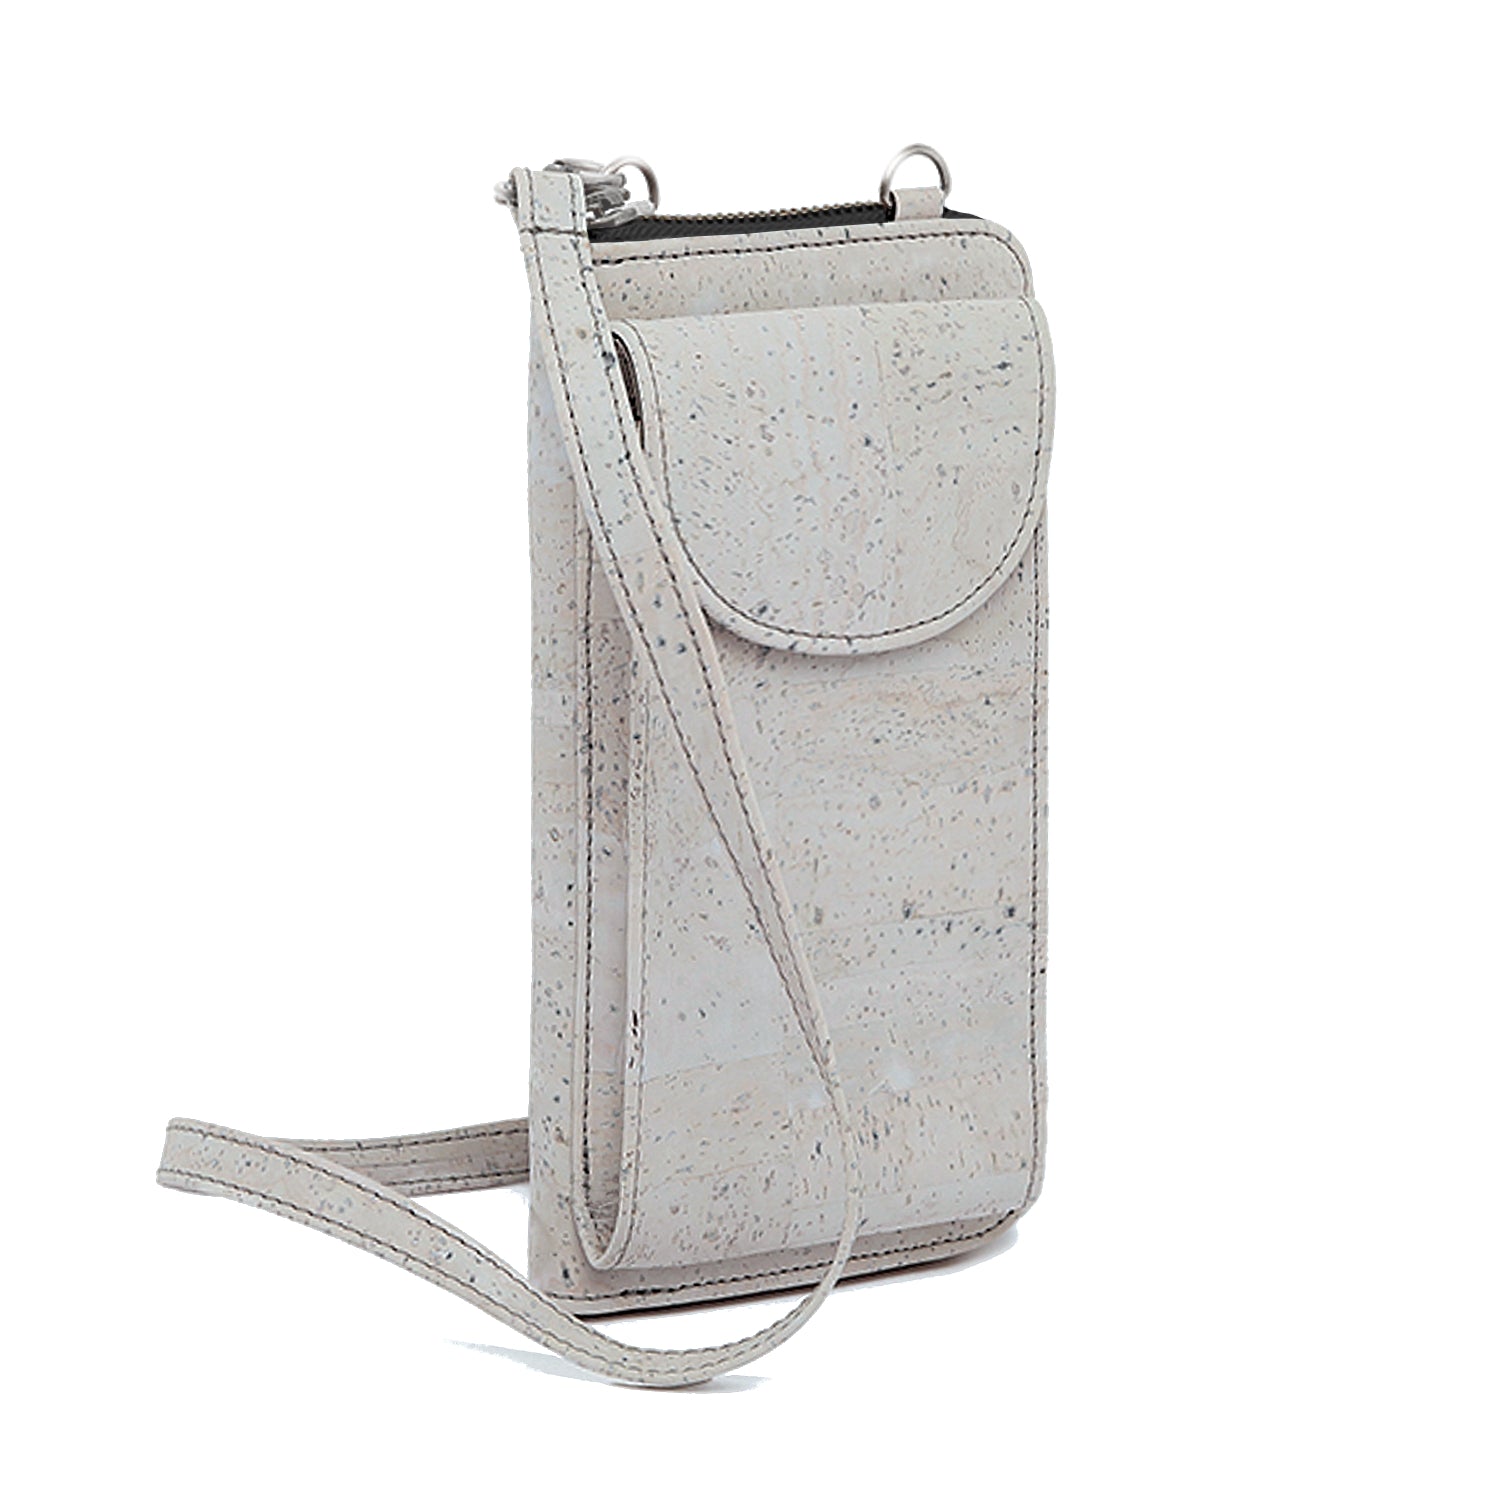 Cork Phone Wallet Bag - Cork and Company | Made in Portugal | Vegan Eco-Friendly Fashion